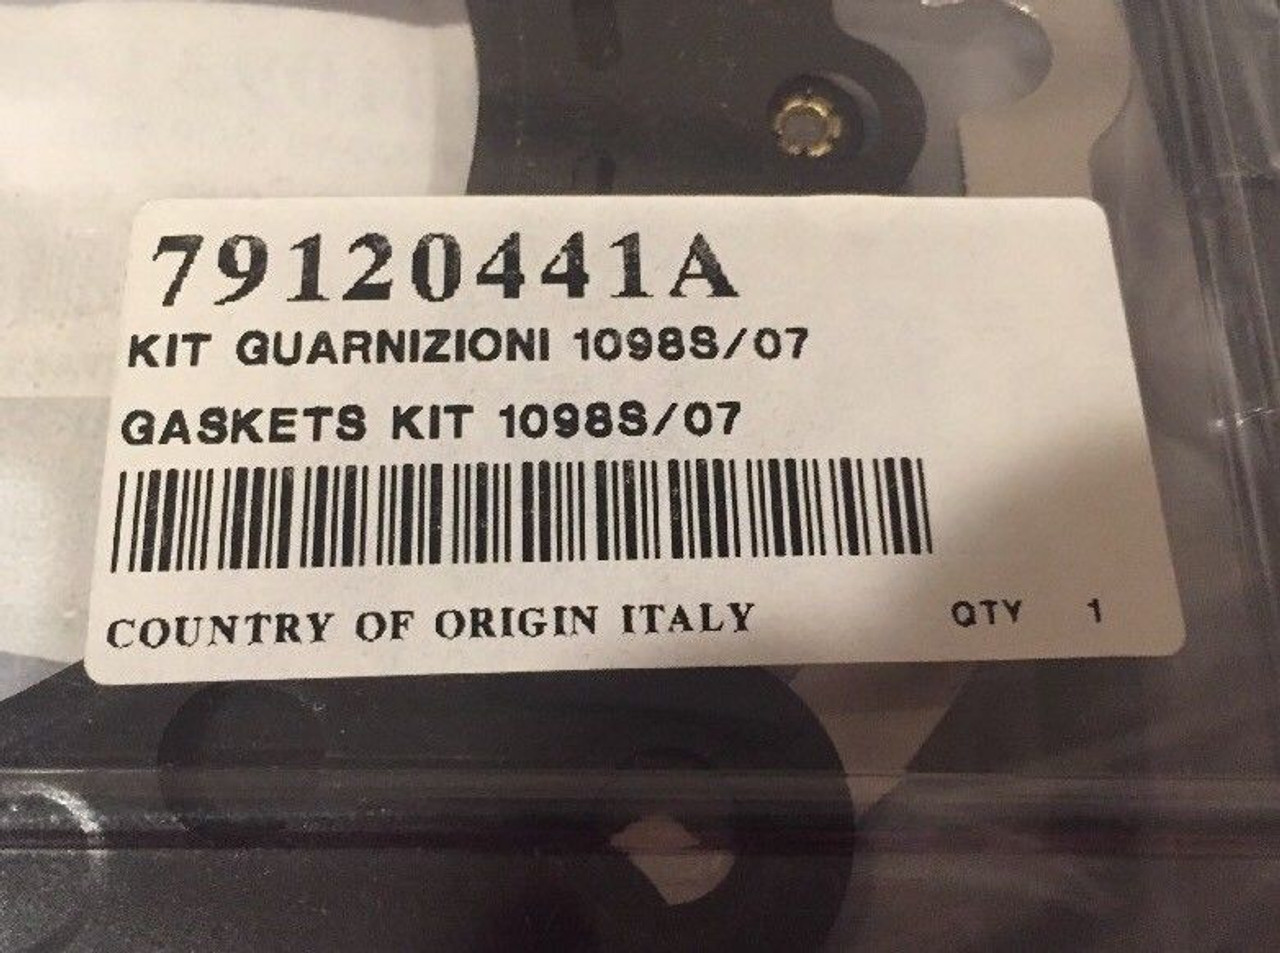 Original OEM DUCATI gasket kit for 1098s 07 #79120441A NEW IN PACKAGE, shopthegarage